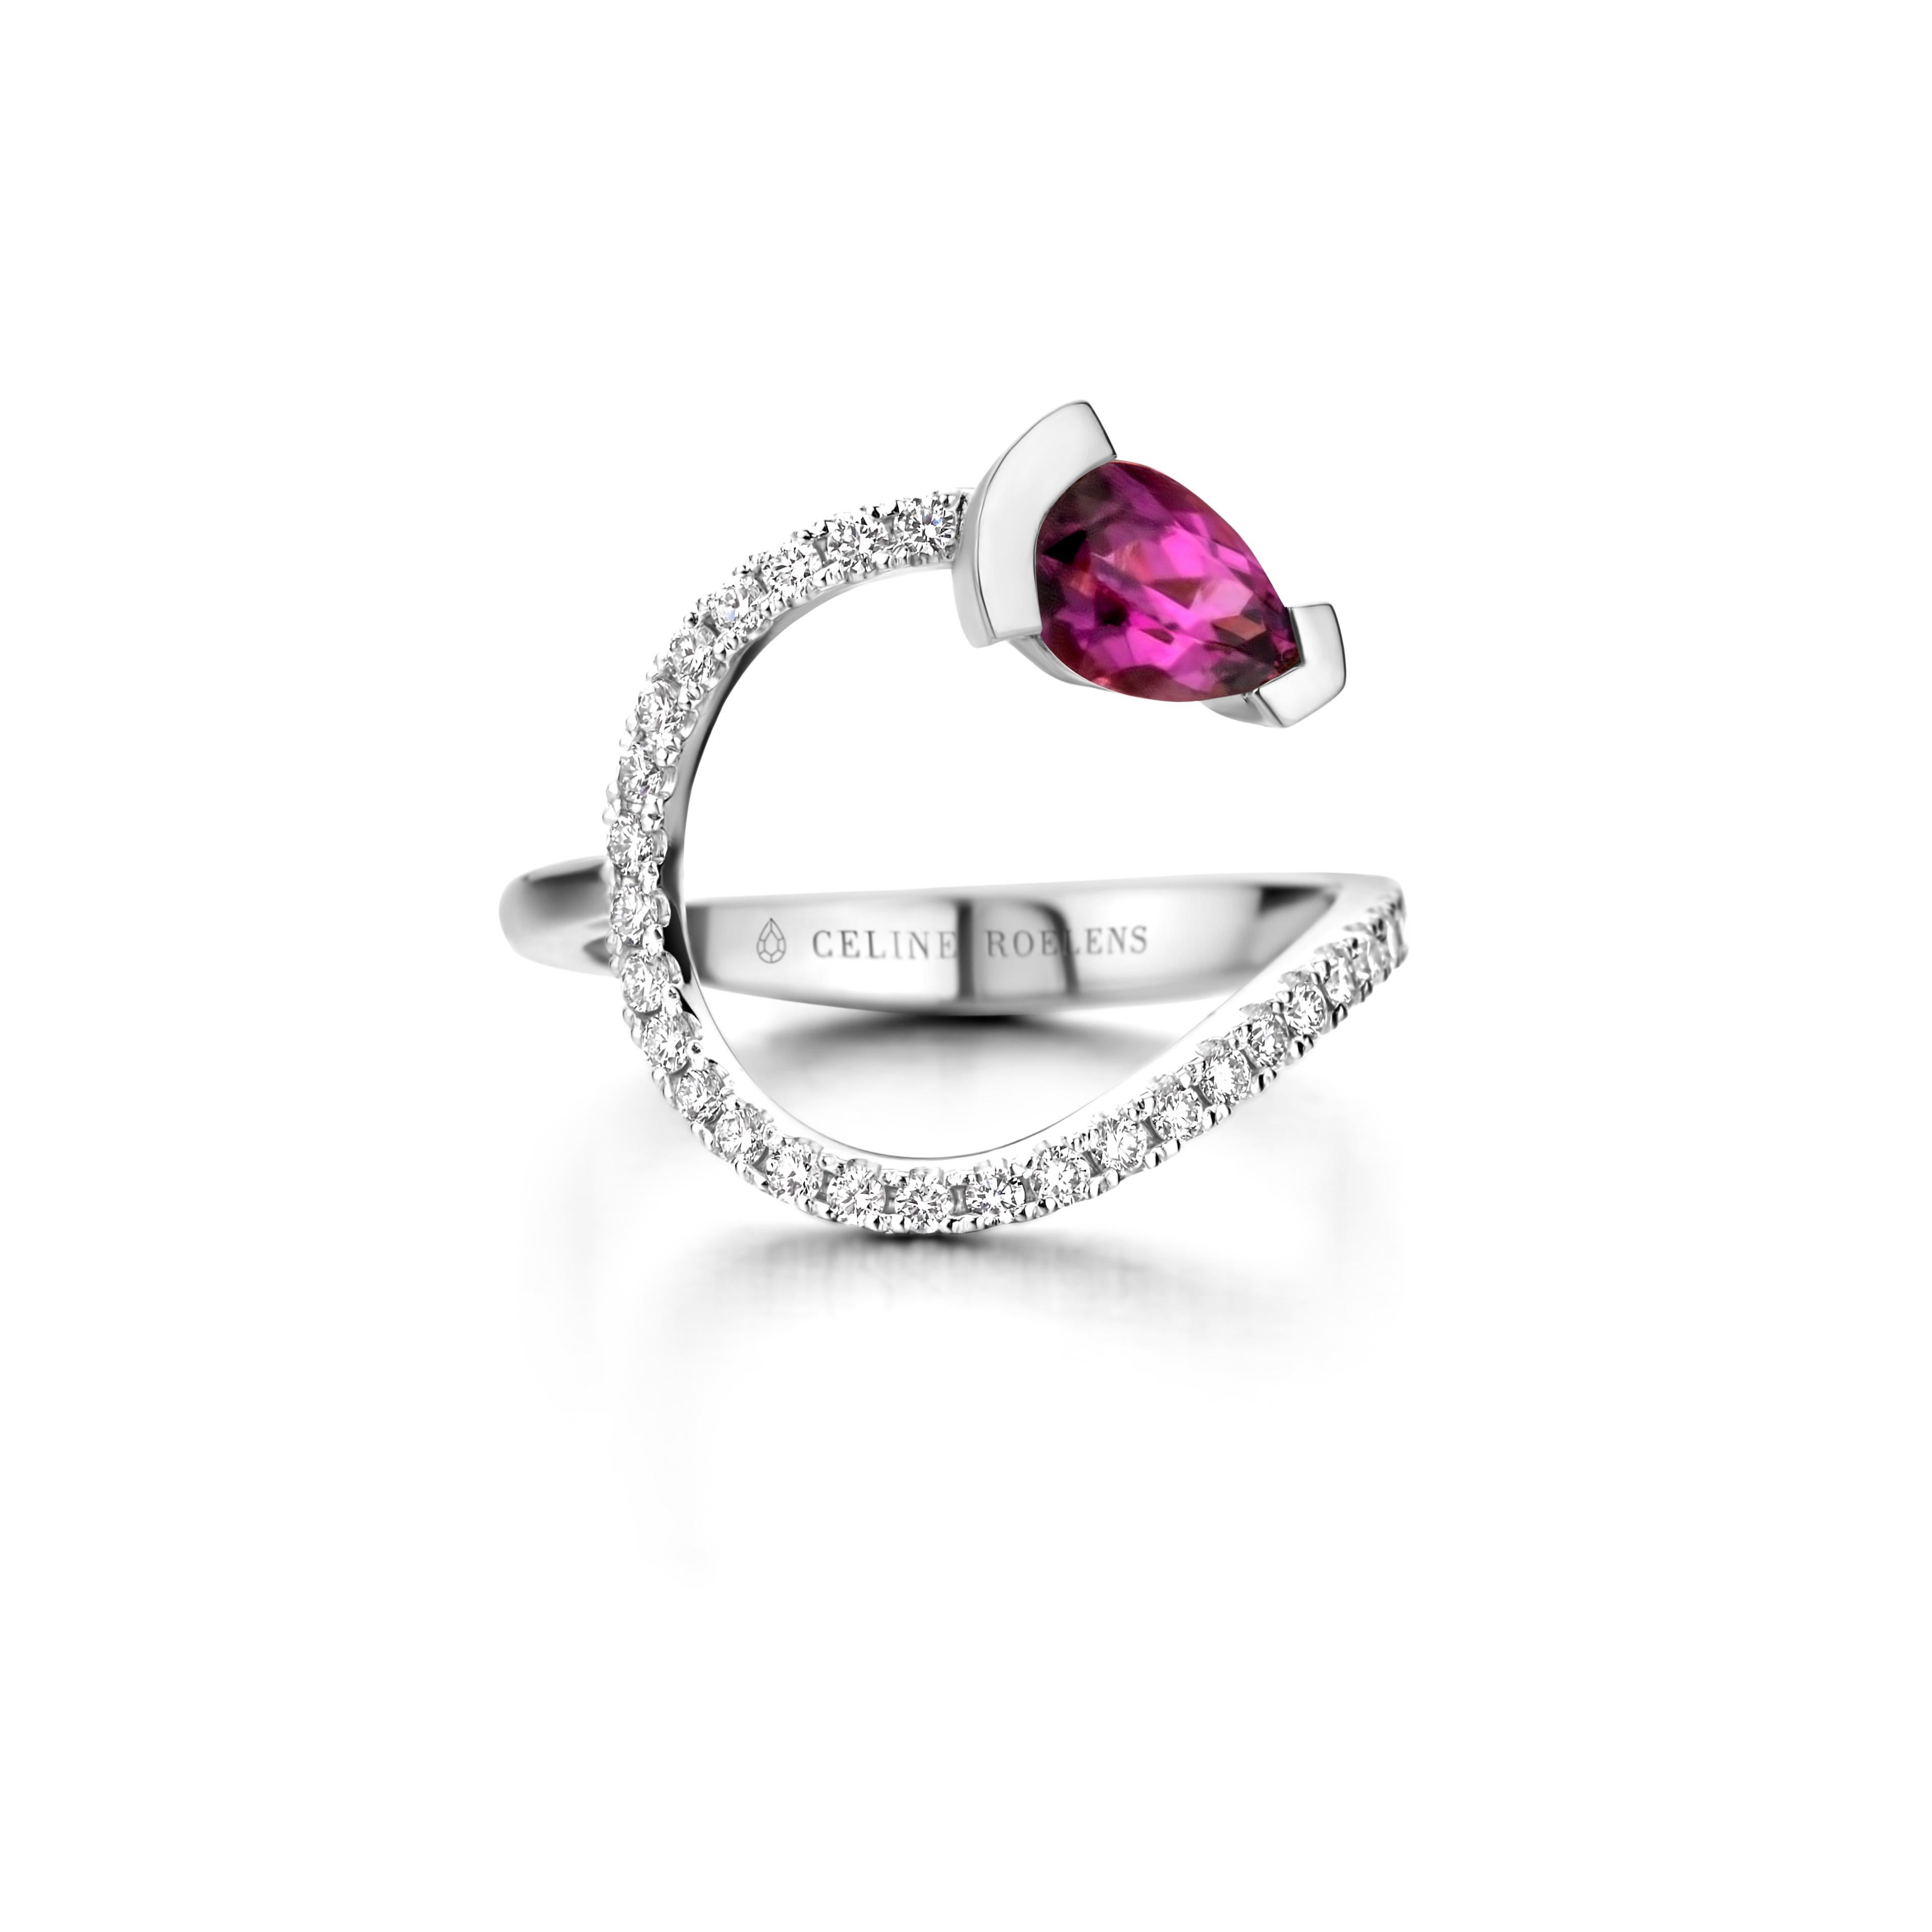 ADELINE curved ring in 18Kt rose gold set with a pear shaped Royal purple garnet and 0,33 Ct of white brilliant cut diamonds - VS F quality.